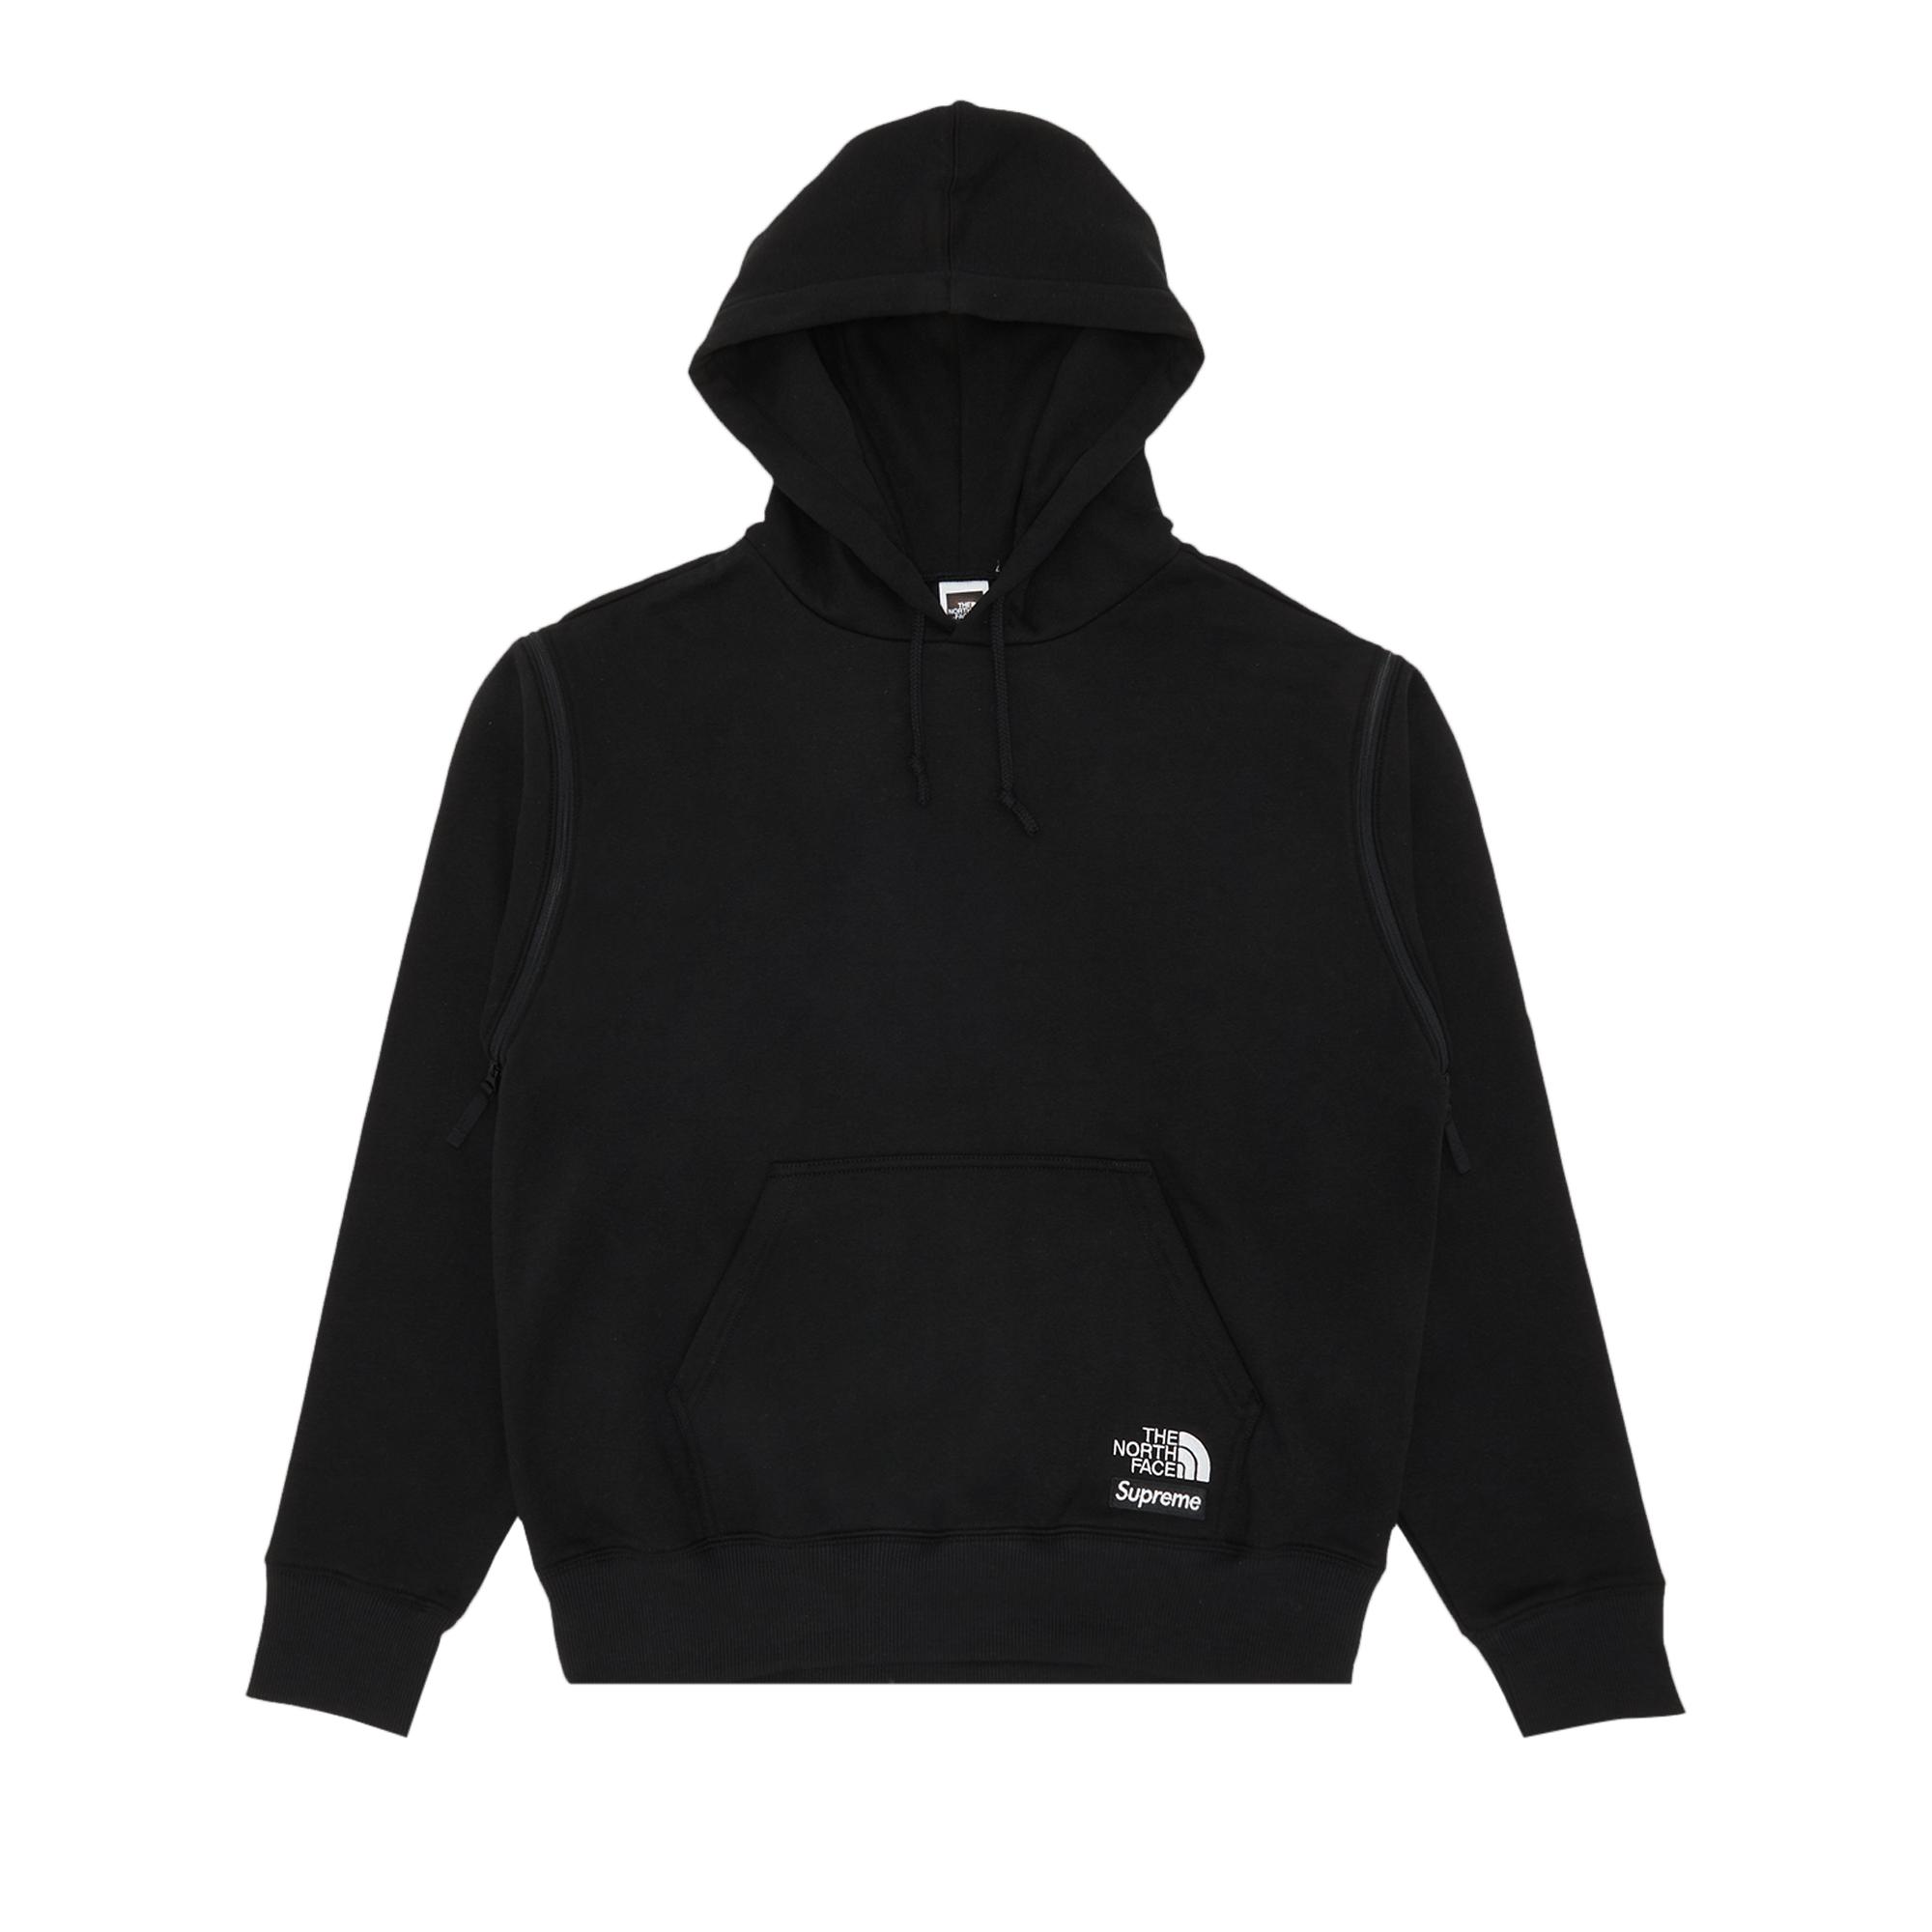 Supreme X The North Face Convertible Hooded Sweatshirt 'black' for